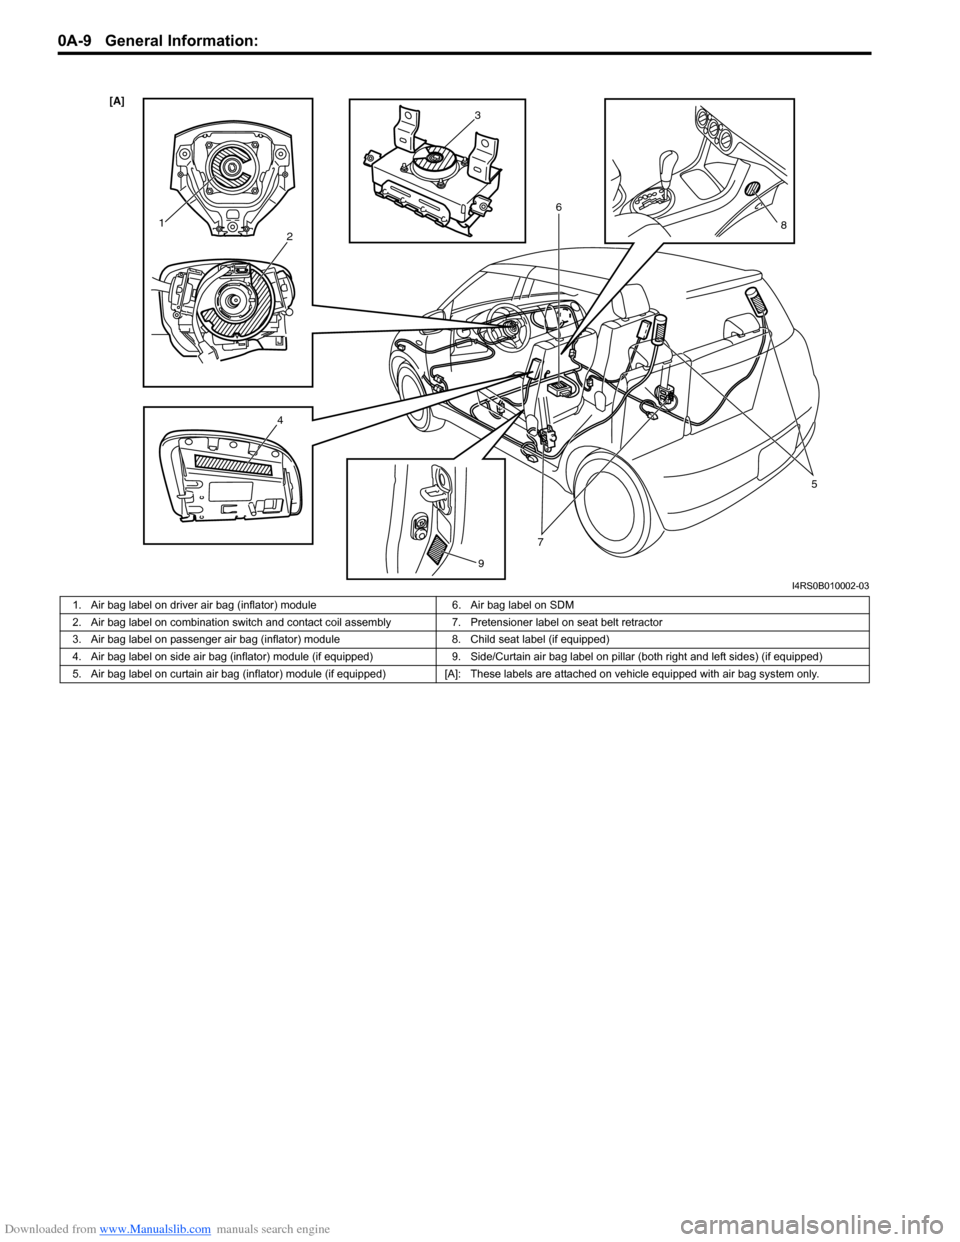 SUZUKI SWIFT 2008 2.G Service Owners Manual Downloaded from www.Manualslib.com manuals search engine 0A-9 General Information: 
[A] 
12
4 5
6
7 8
9
3
I4RS0B010002-03
1. Air bag label on driver air bag (inflator) module 6. Air bag label on SDM
2